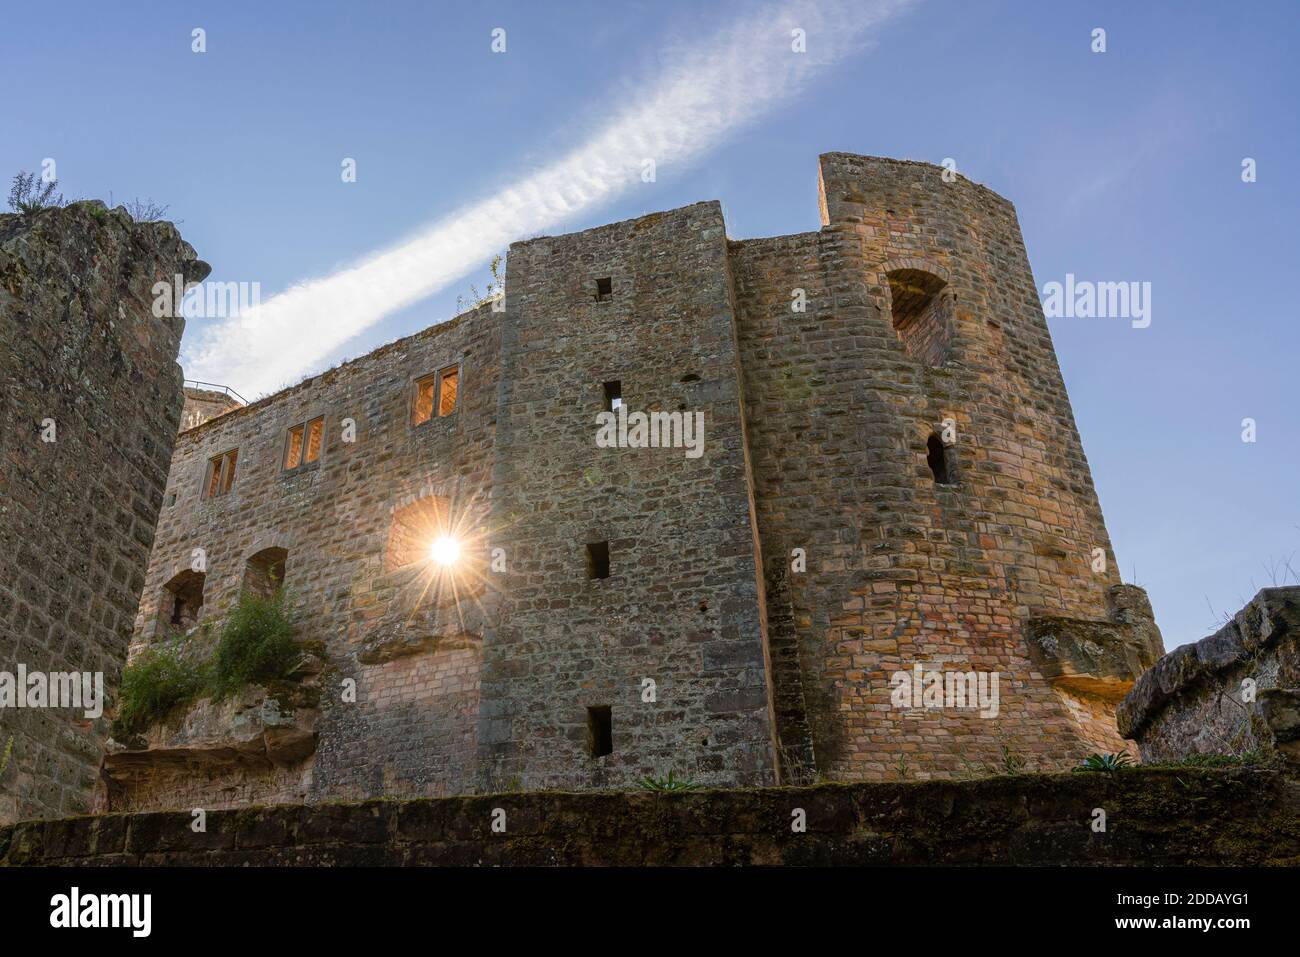 Germany, Rhineland-Palatinate, Fortified walls of Grafenstein Castle at sunset Stock Photo